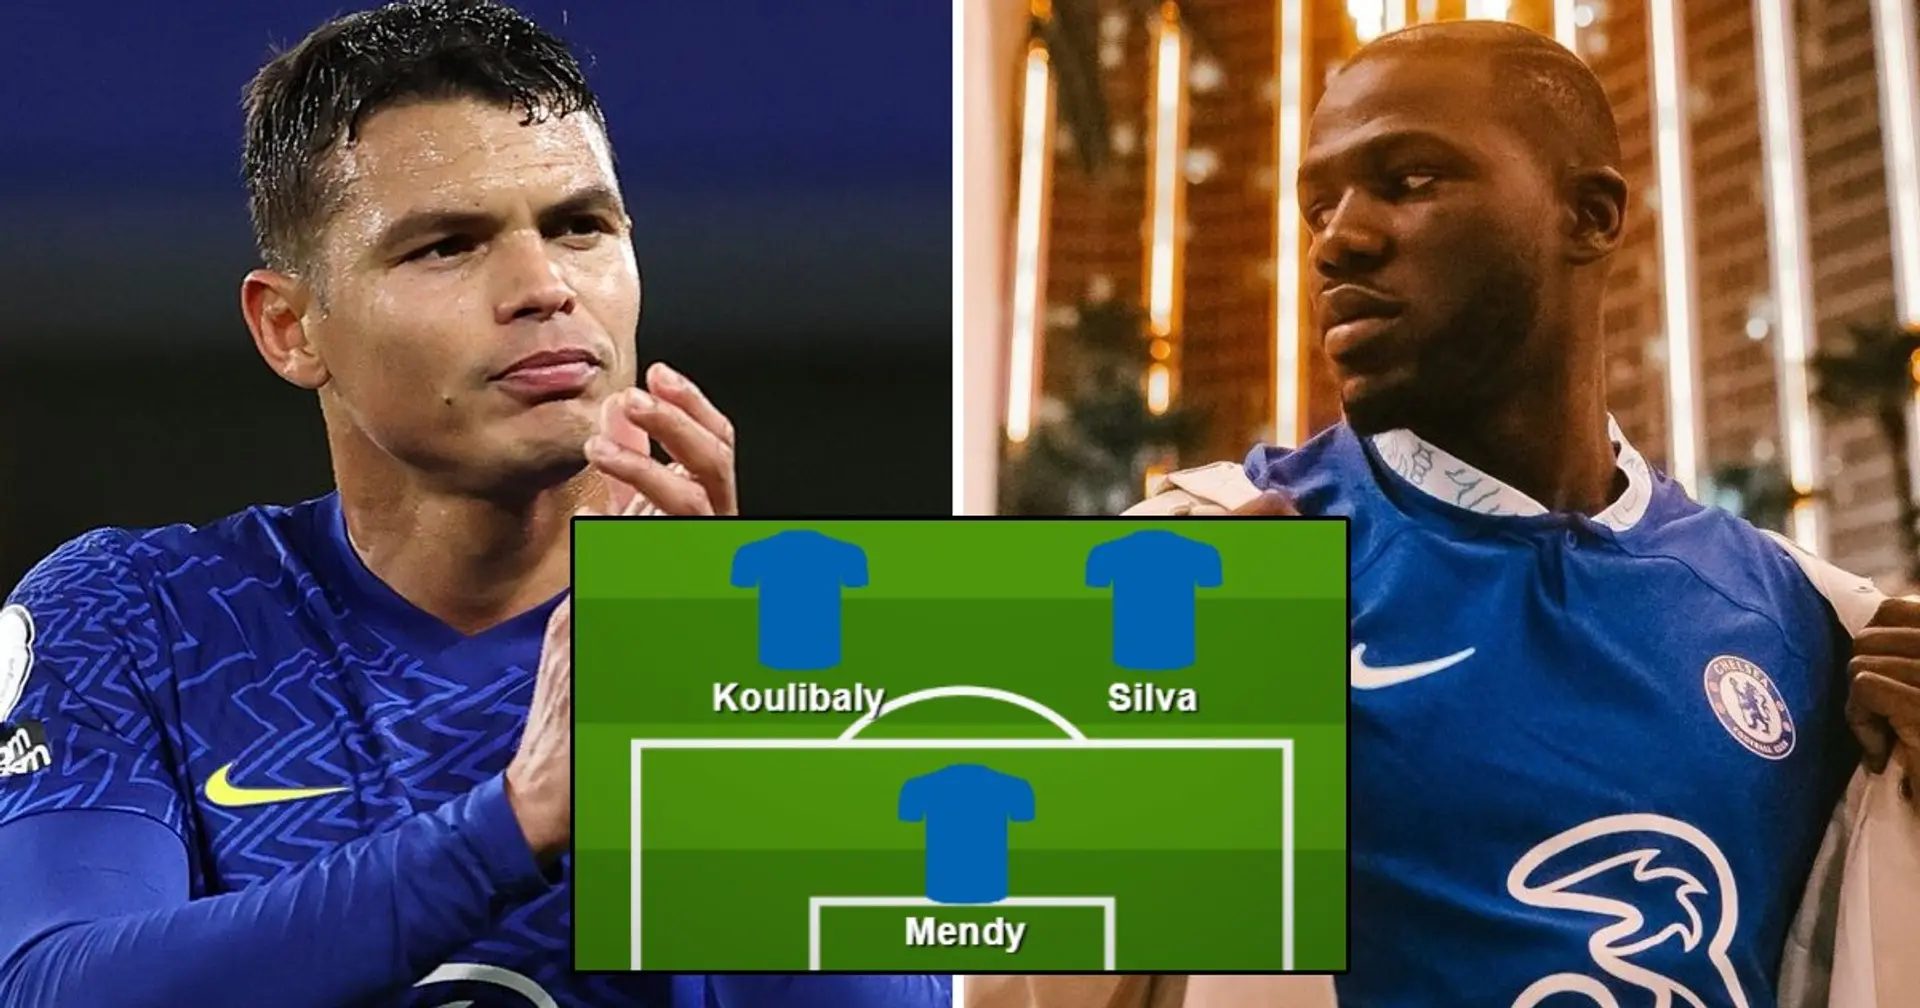 Wall of London: 2 ways Chelsea defence can line up with Koulibaly 